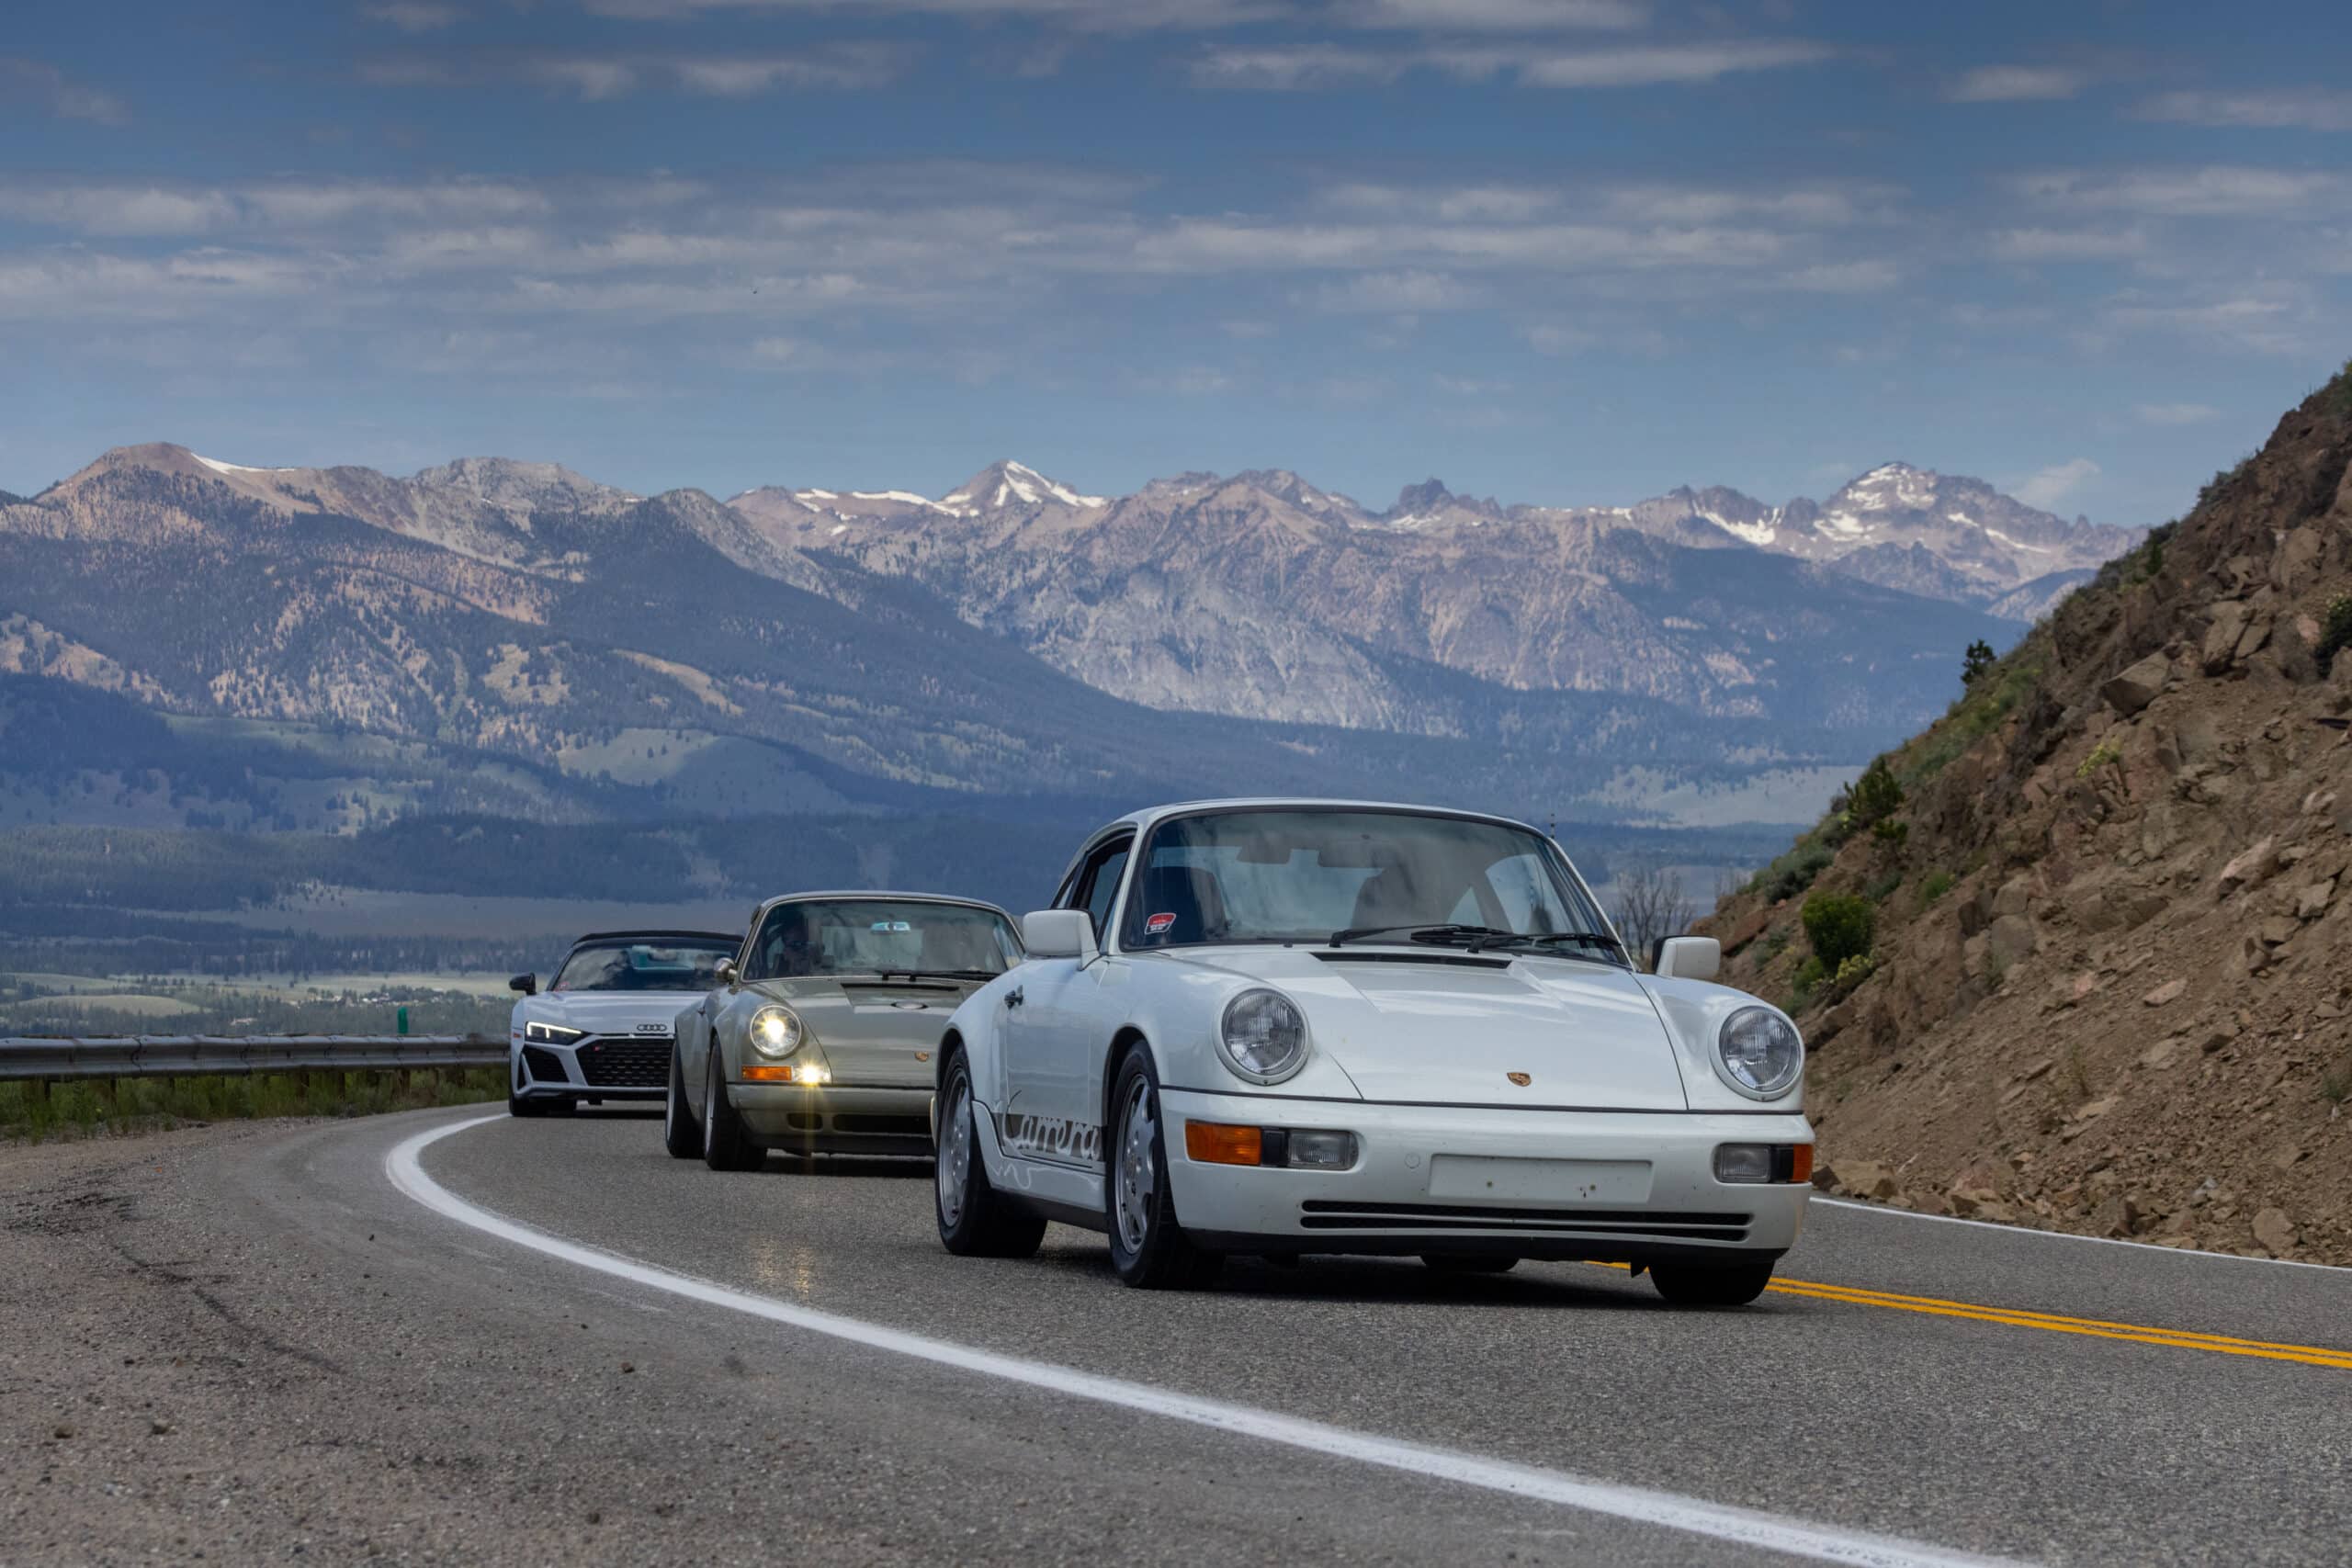 A white porsche 911 driving down a mountain road, displaying strategic driving skills.